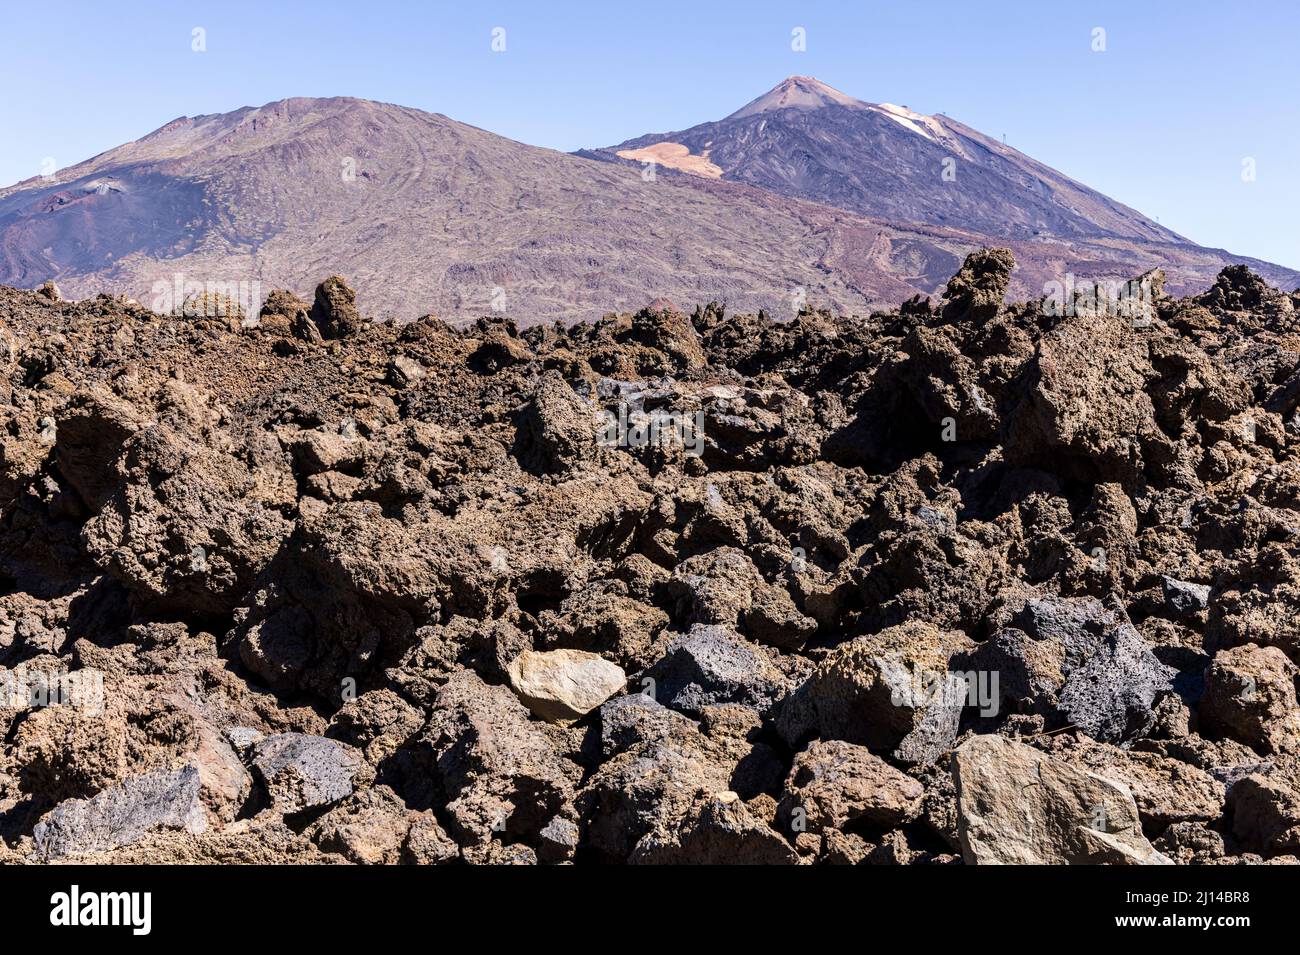 Rugged volcanic landscape of a solidified lava flow looking towards the Pico Viejo and mount Teide in the Las Canadas del Teide national park, Tenerif Stock Photo